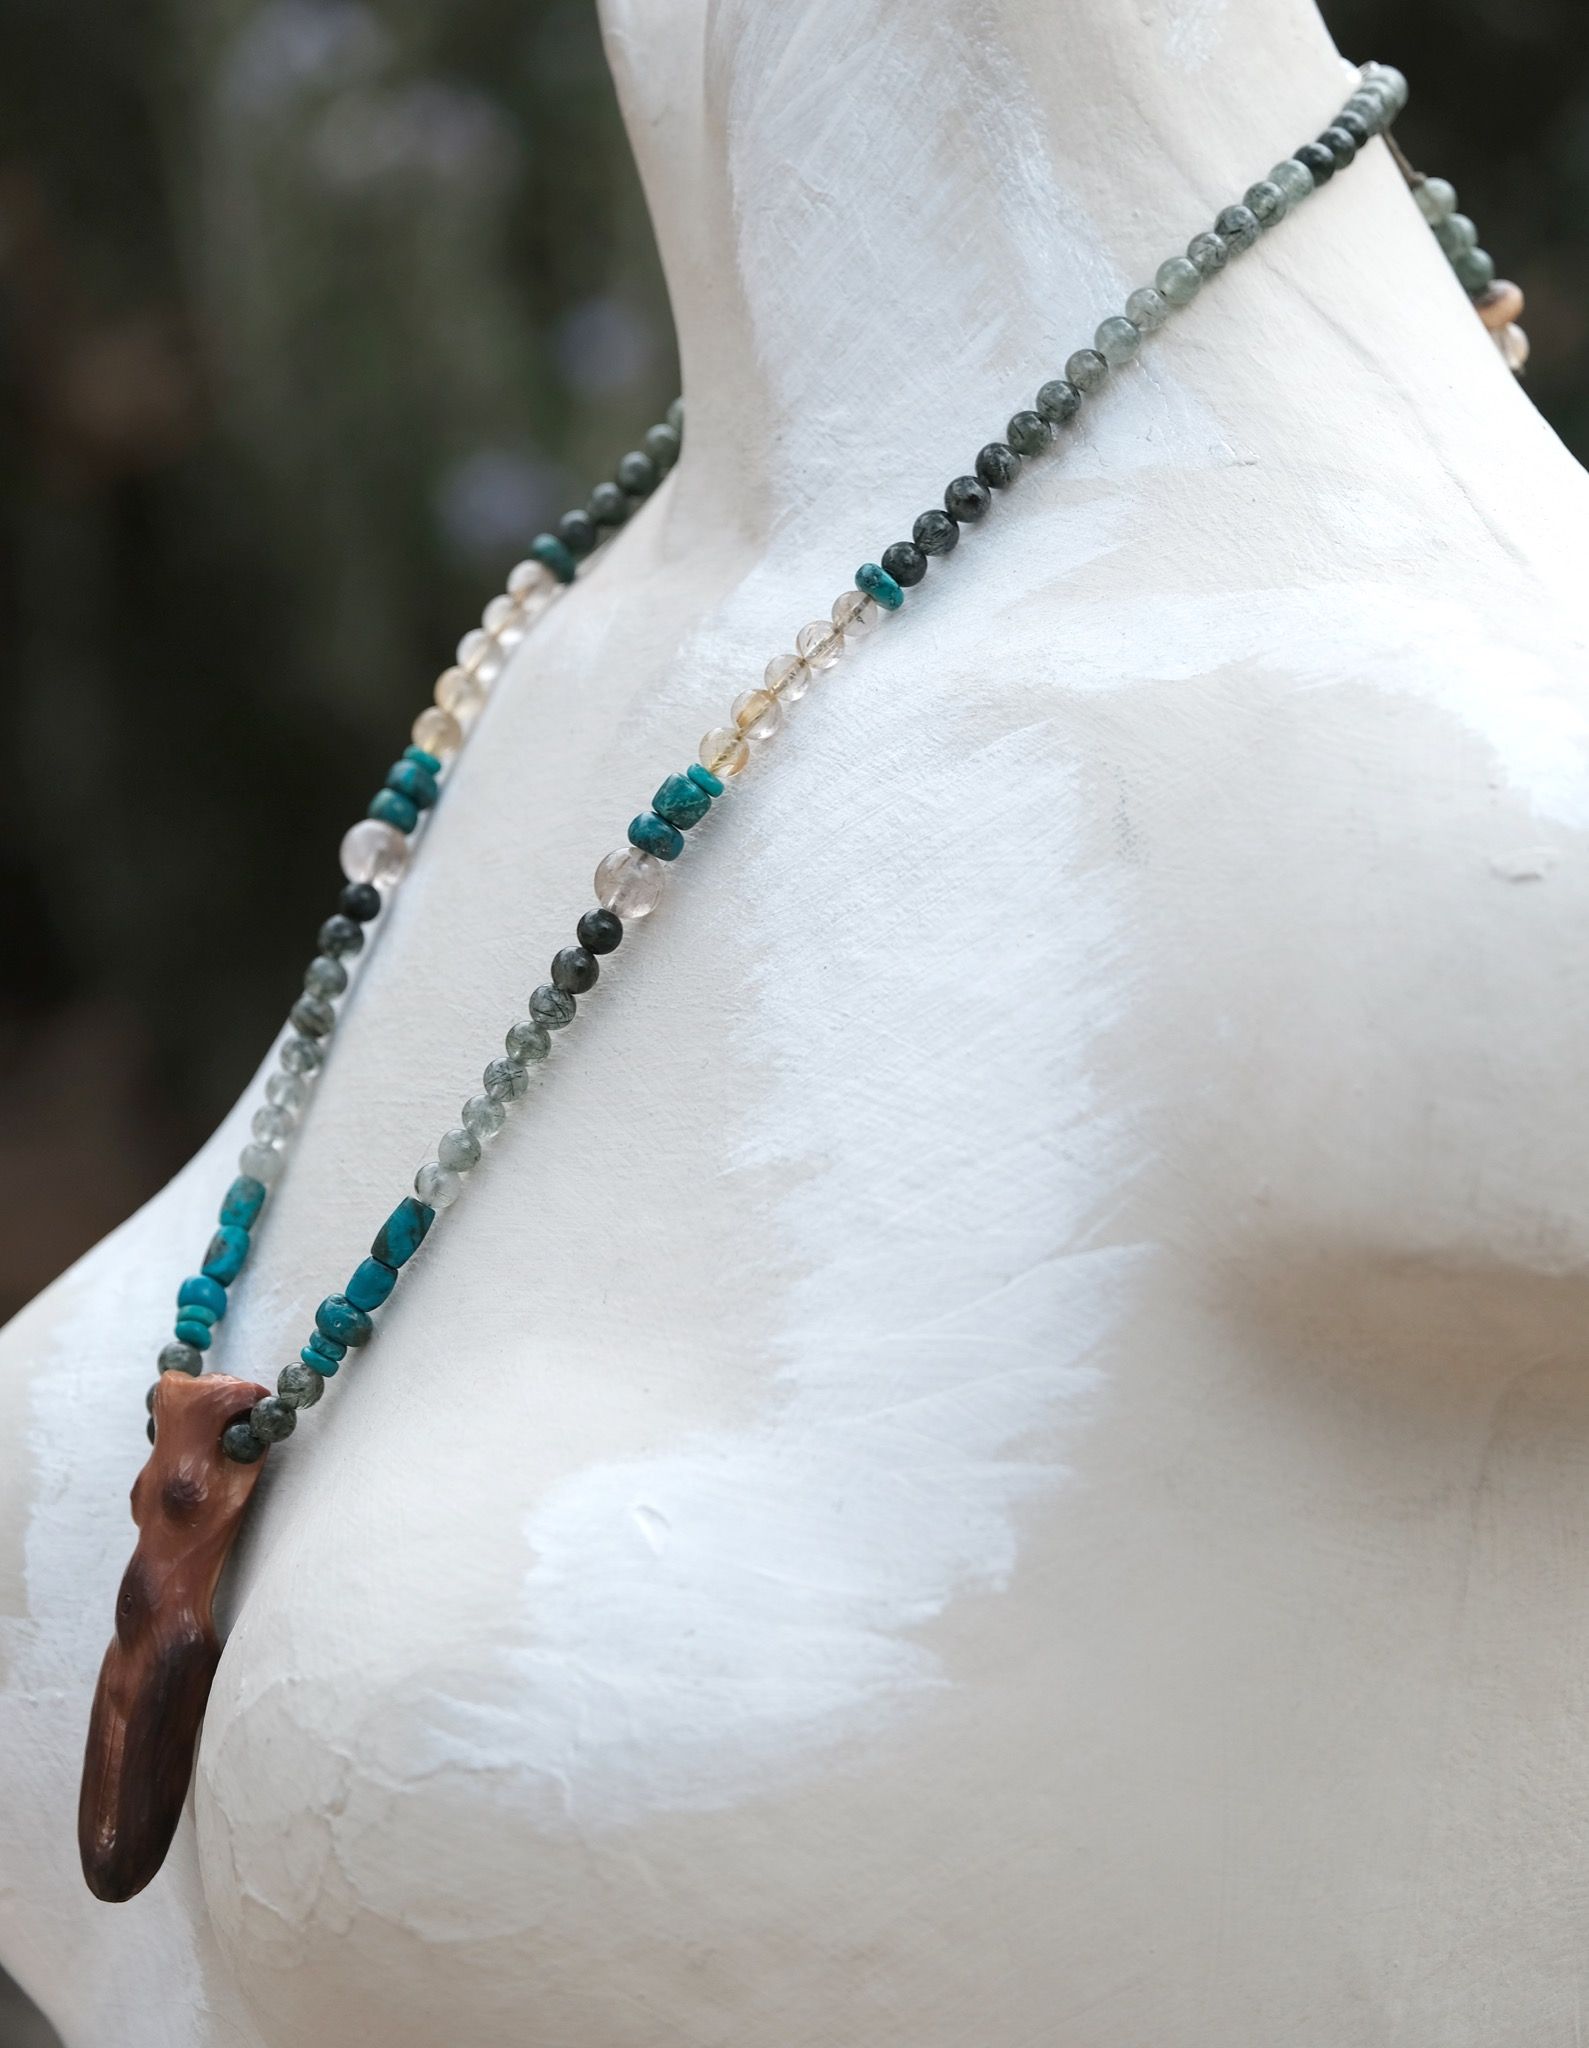 A necklace of green, blue, golden and Carmel ivory stones with a goddess figure at the center rests on a white painted mannequin